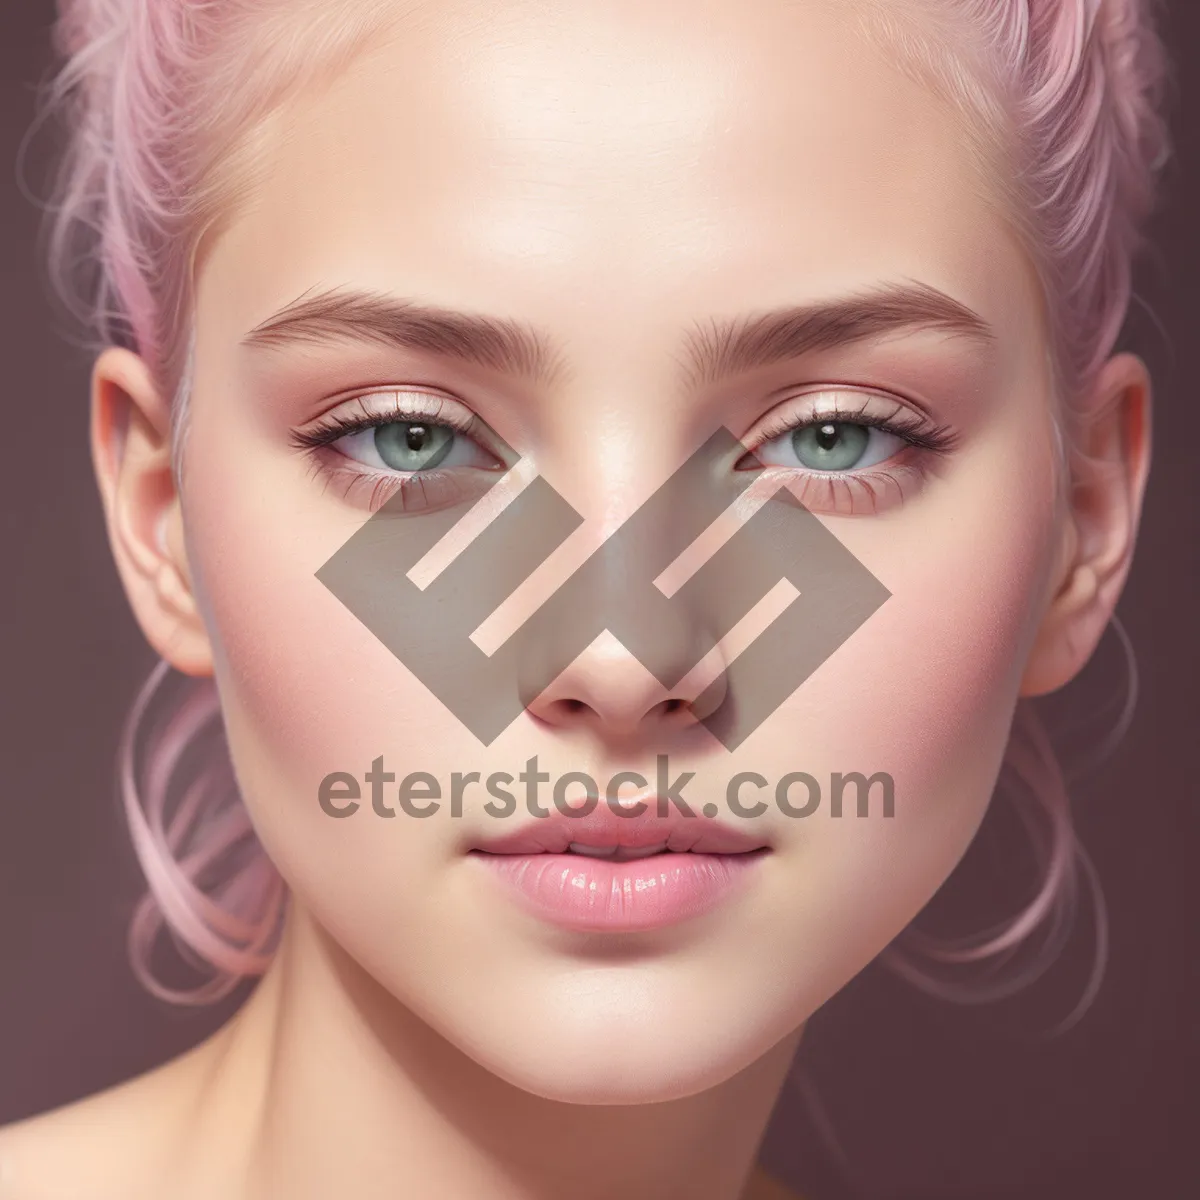 Picture of Stunning Fashion Model with Flawless Makeup and Sensual Eyes